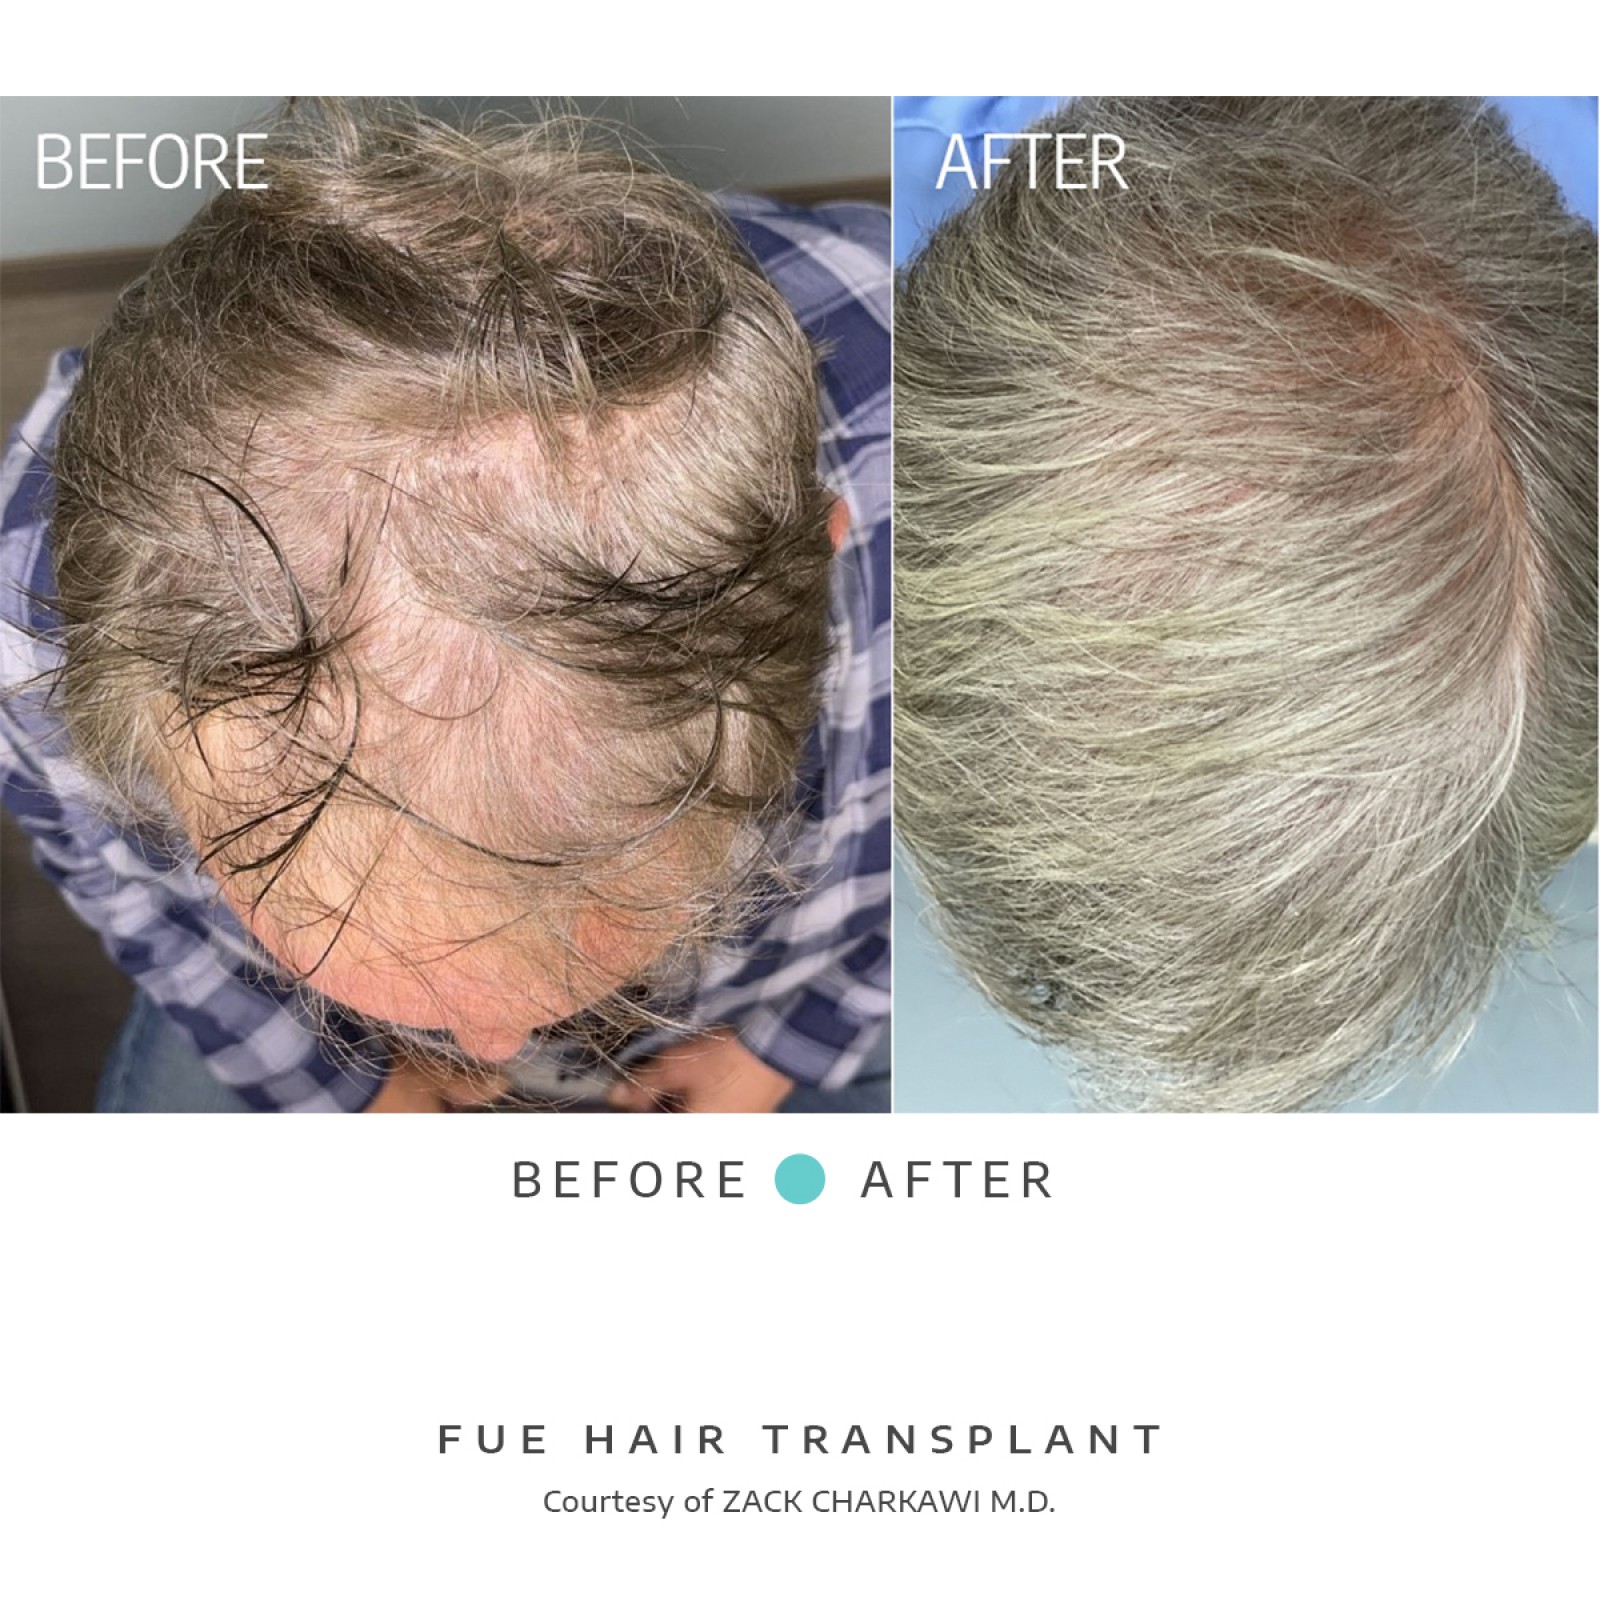 The before image reveals balding and thinning hair on a man's head. The after image displays luxuriant, natural-looking hair regrowth as a result of a hair transplant.